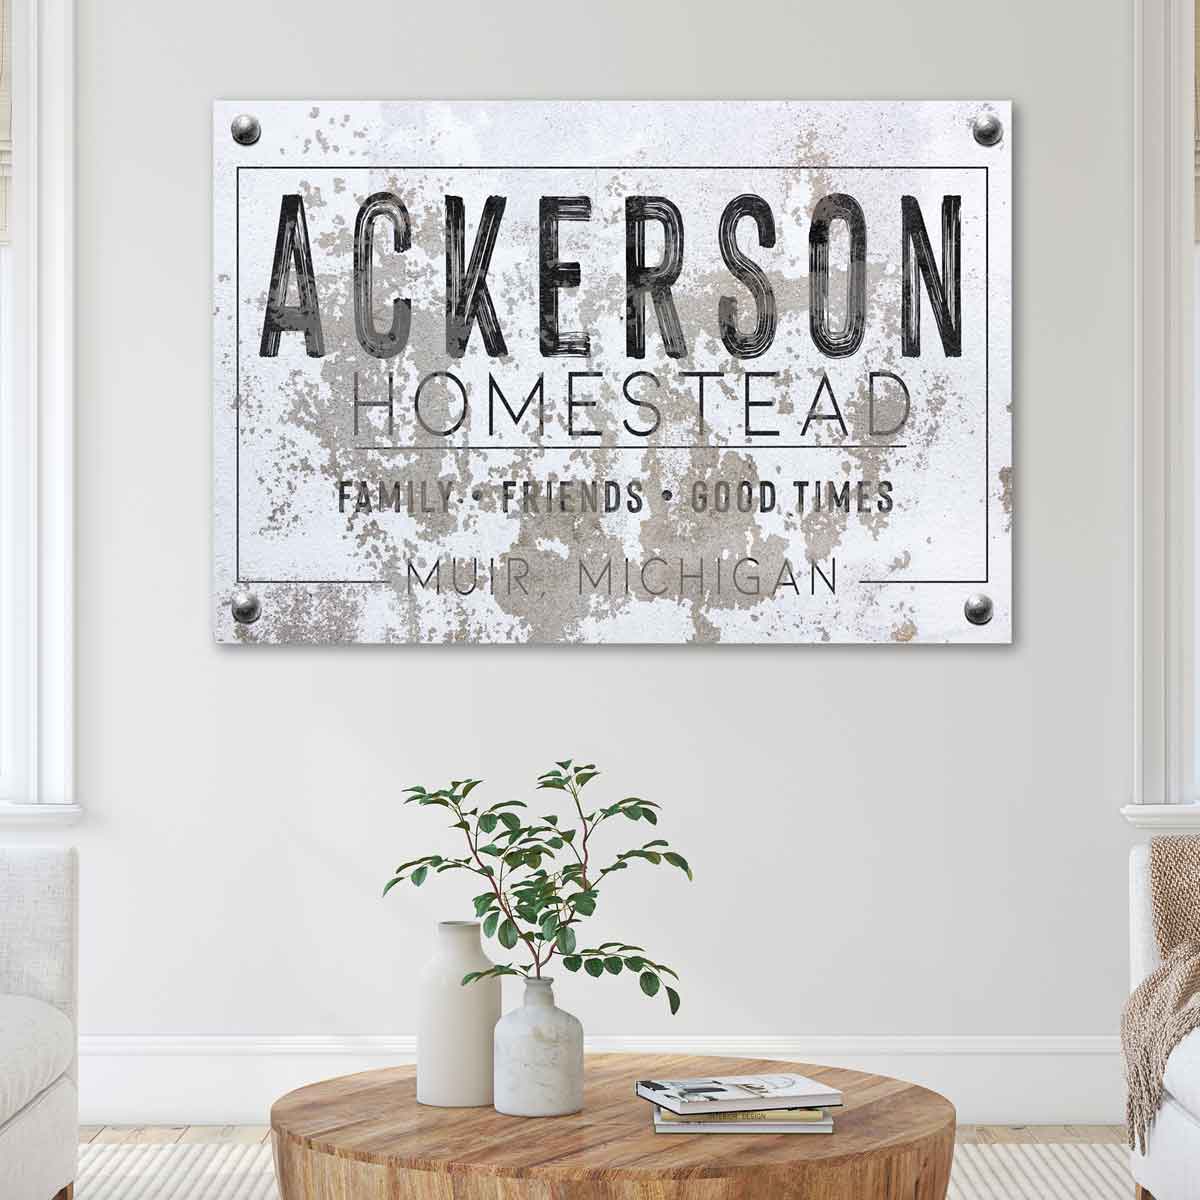  Kitchen Wall Decor Canvas Wall Art Rustic Farmhouse Kitchen  Sign Framed Home Decor Wood Grain Background Hd Vintage Wall Art Home  Dining Room House Decor Sayings 20x12 Inch : Home 